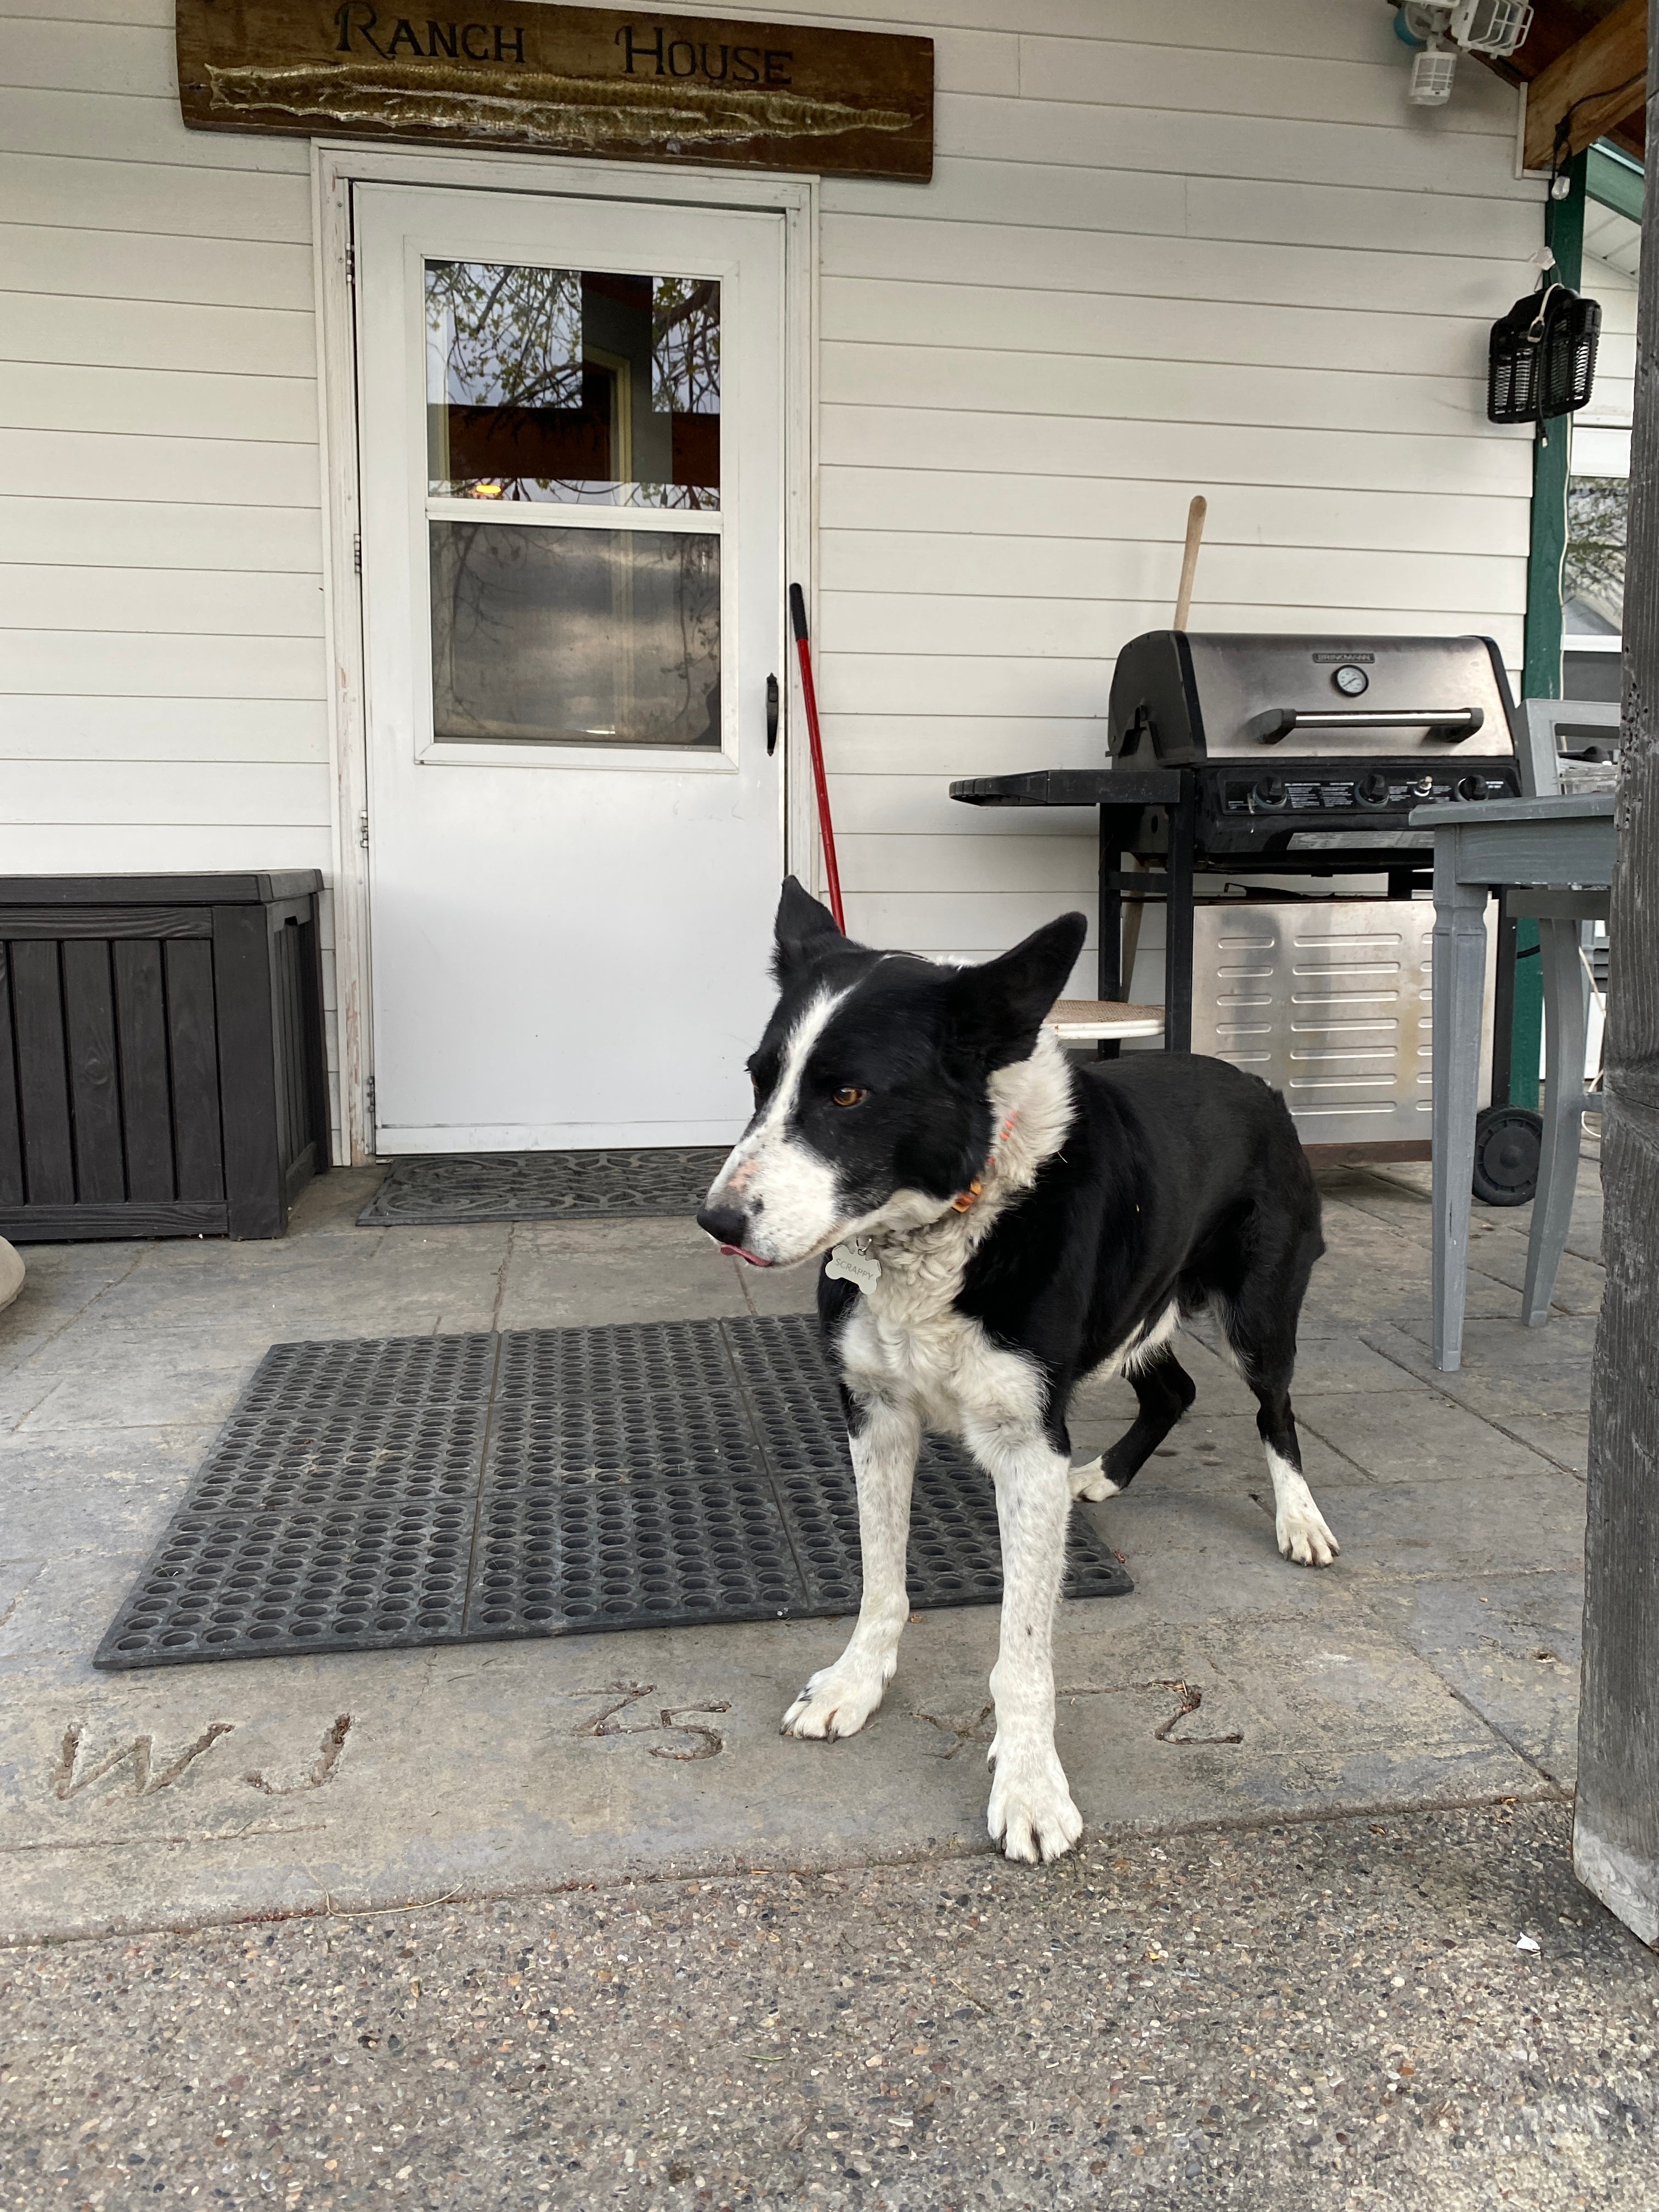 image shows a black and white sheepdog stands on the porch of a house. The sign above the door says "ranch house"